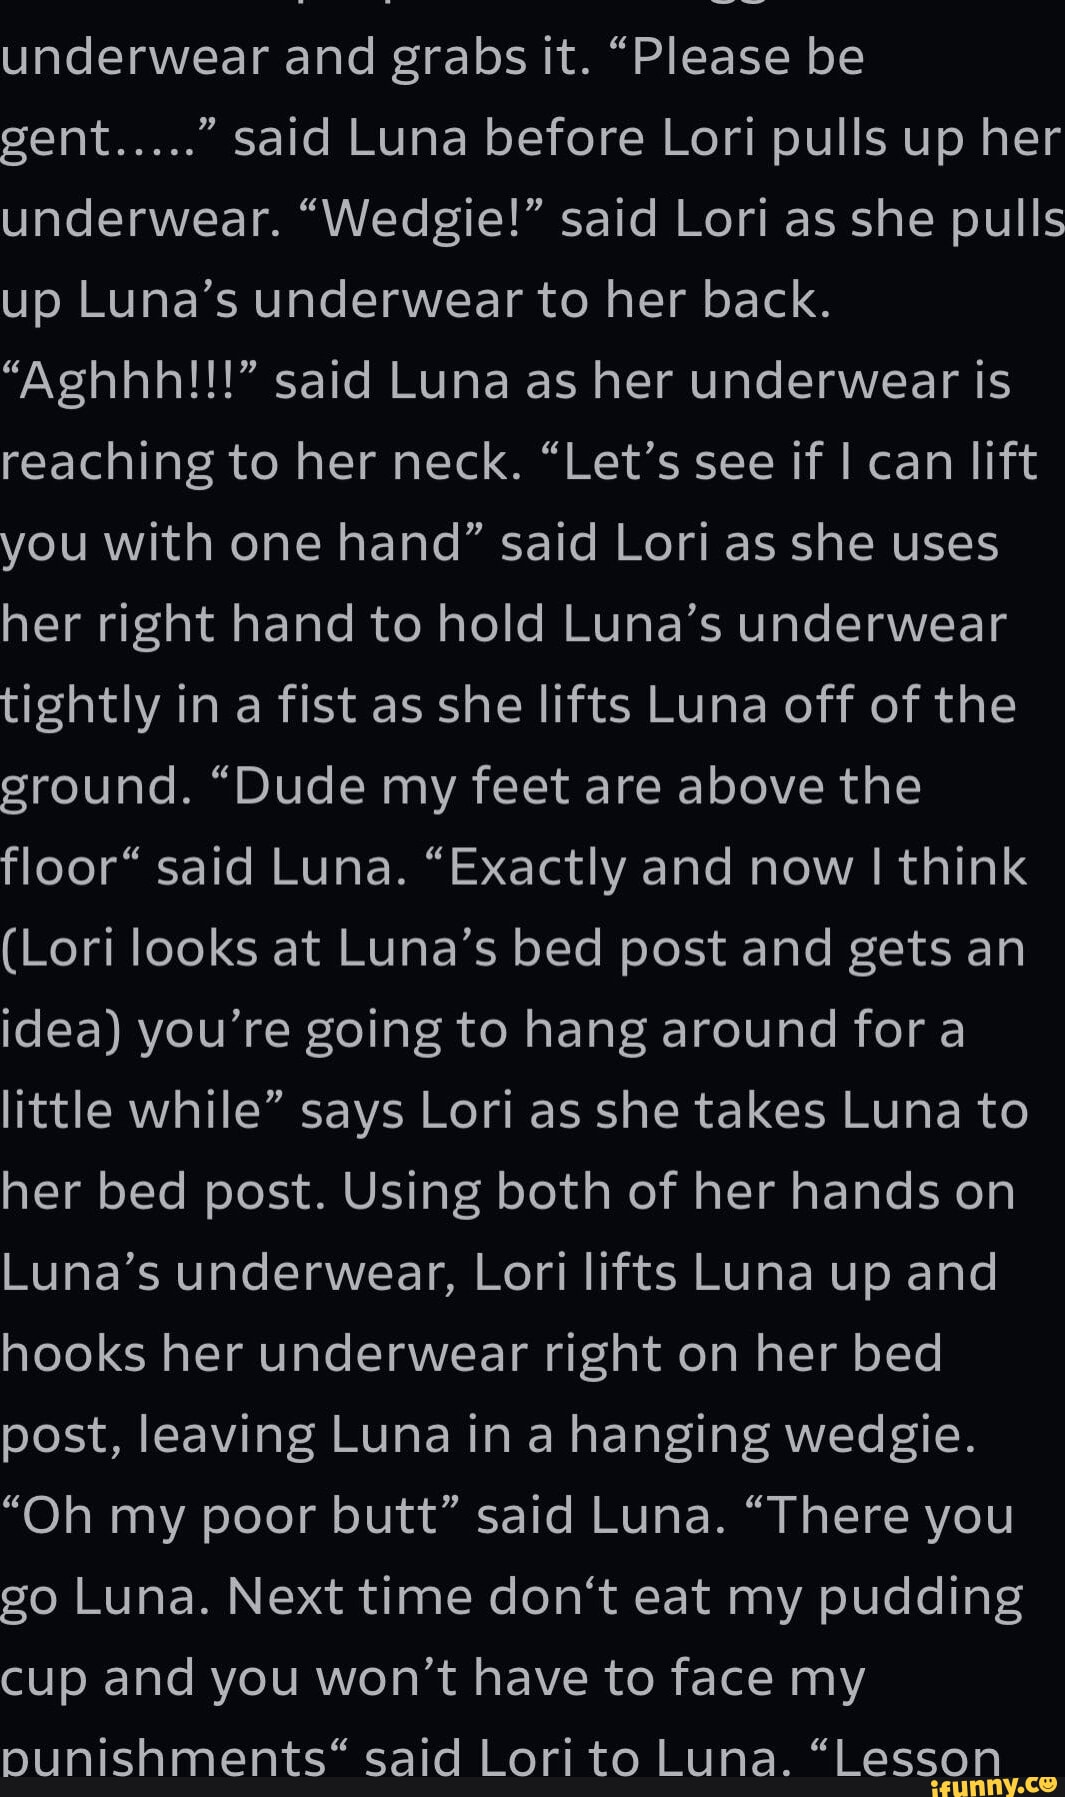 Underwear and grabs it. Please be gent.. said Luna before